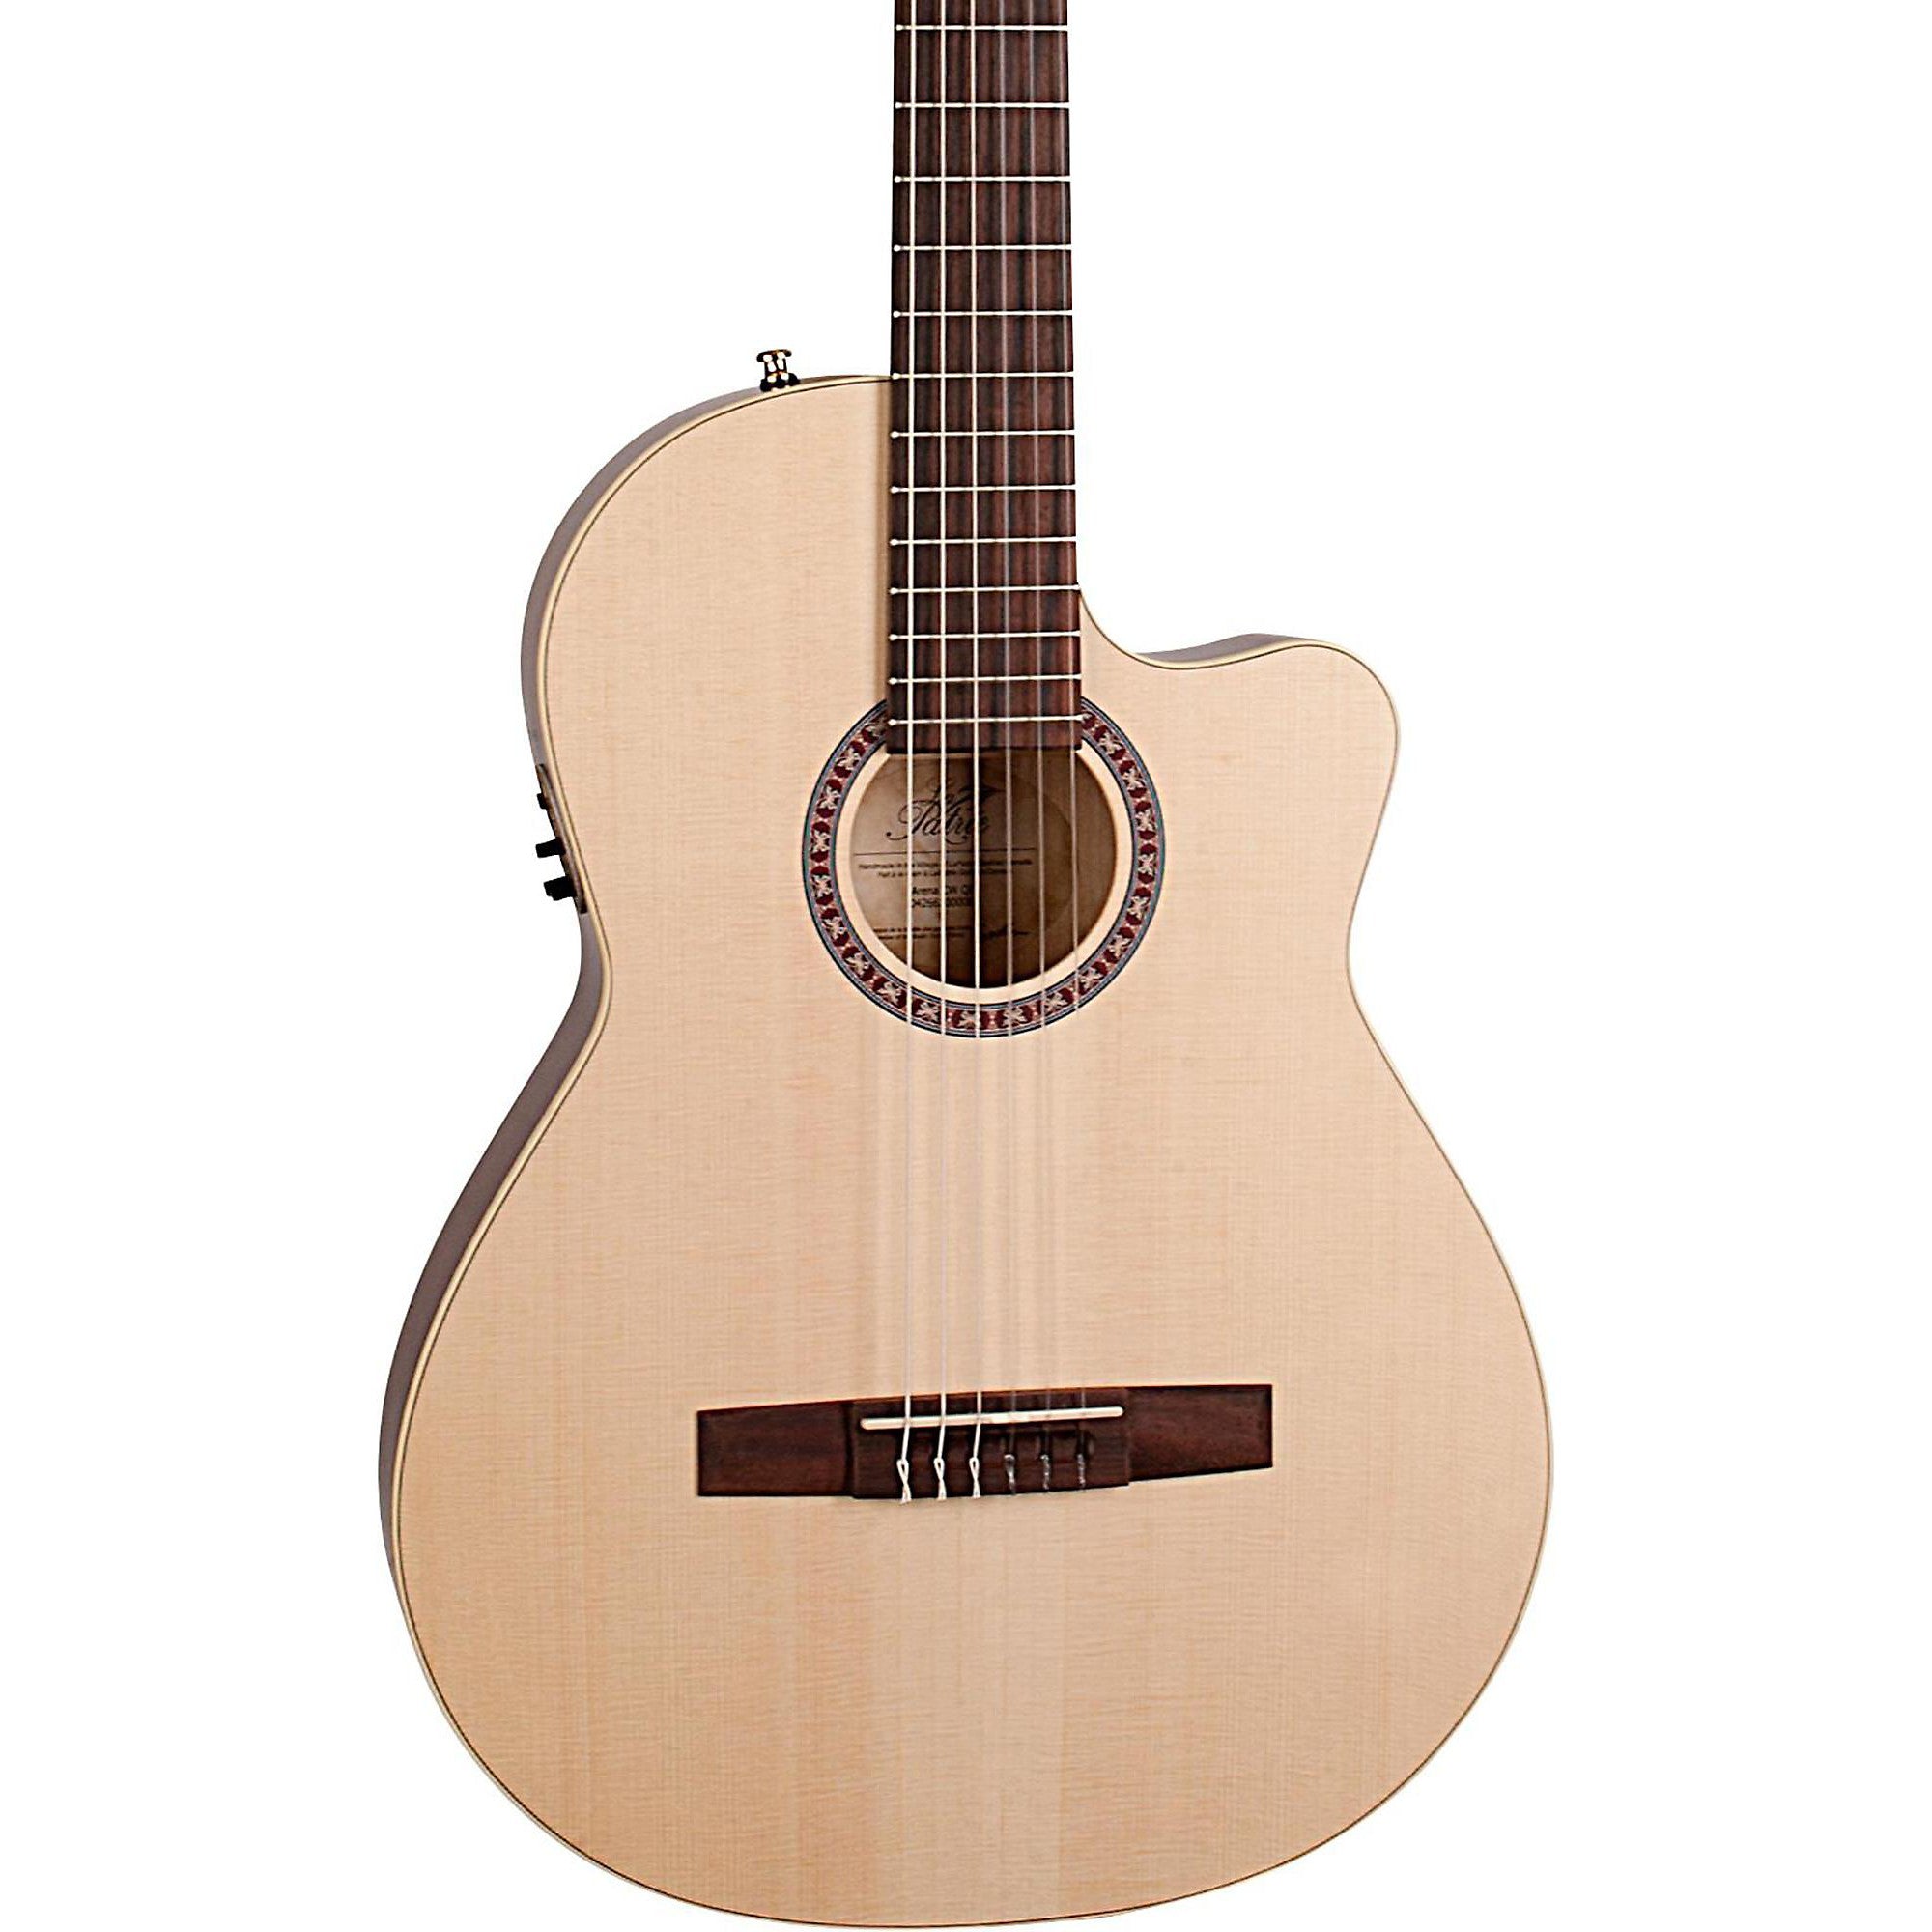 GODIN ARENA CW QIT NYLON STRING ELECTRIC CLASSICAL GUITAR MADE IN CANADA - NATURAL